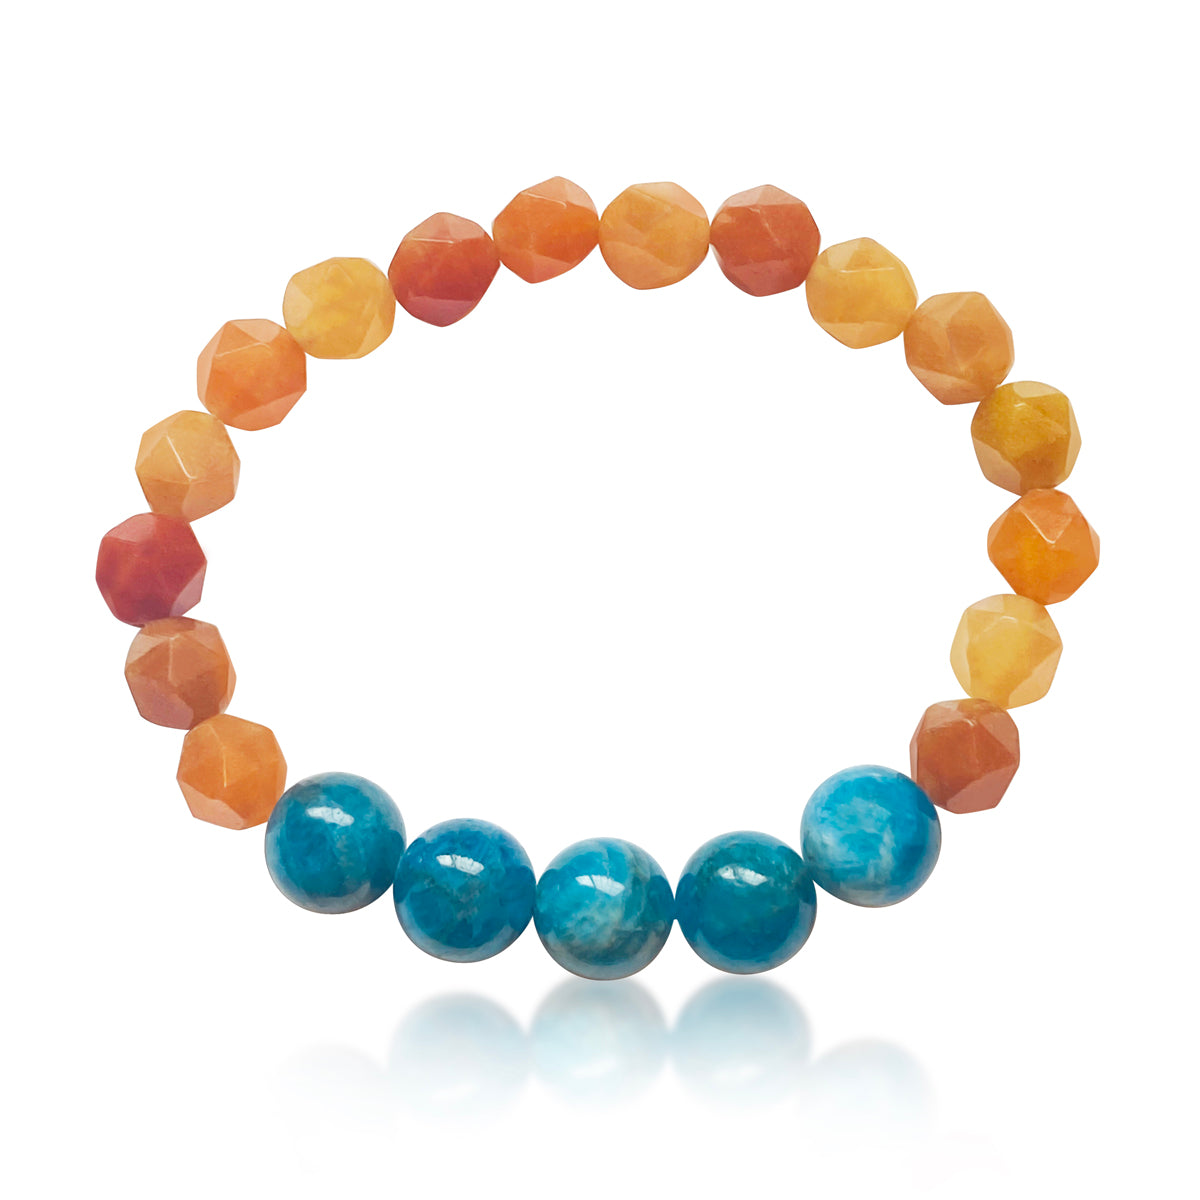 Red Aventurine and Apatite Gemstone Bracelet for Letting go of the Need to Control